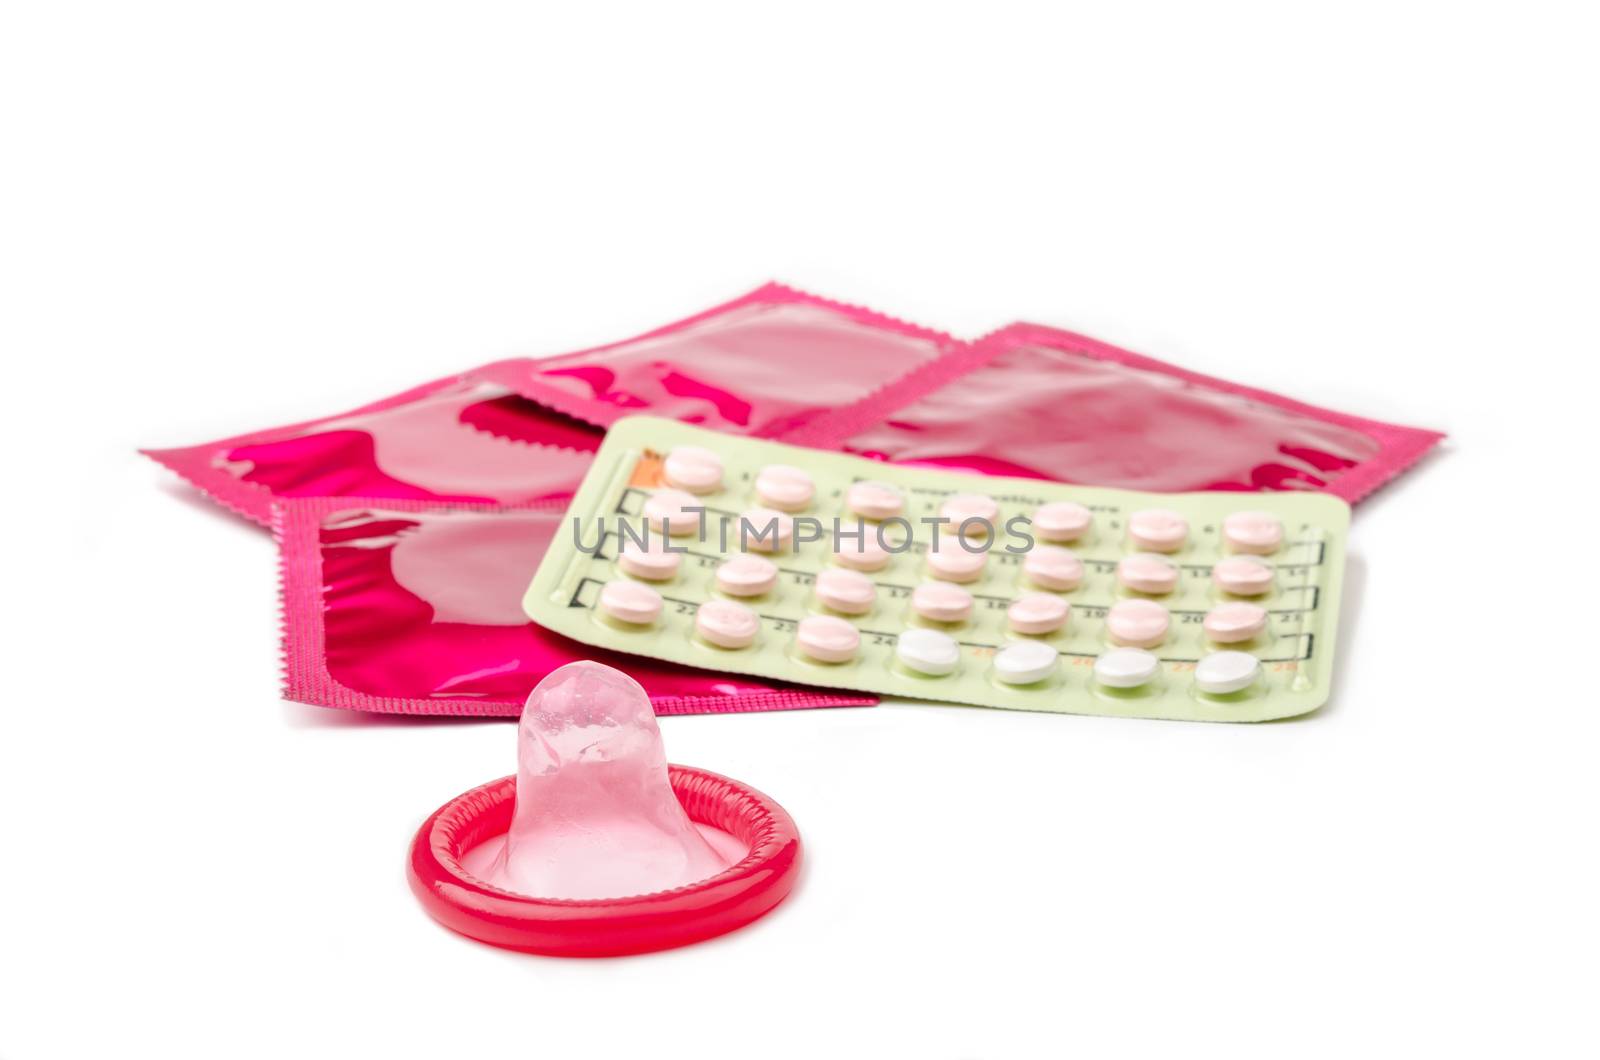 Contraceptive Pill and condoms. by Gamjai